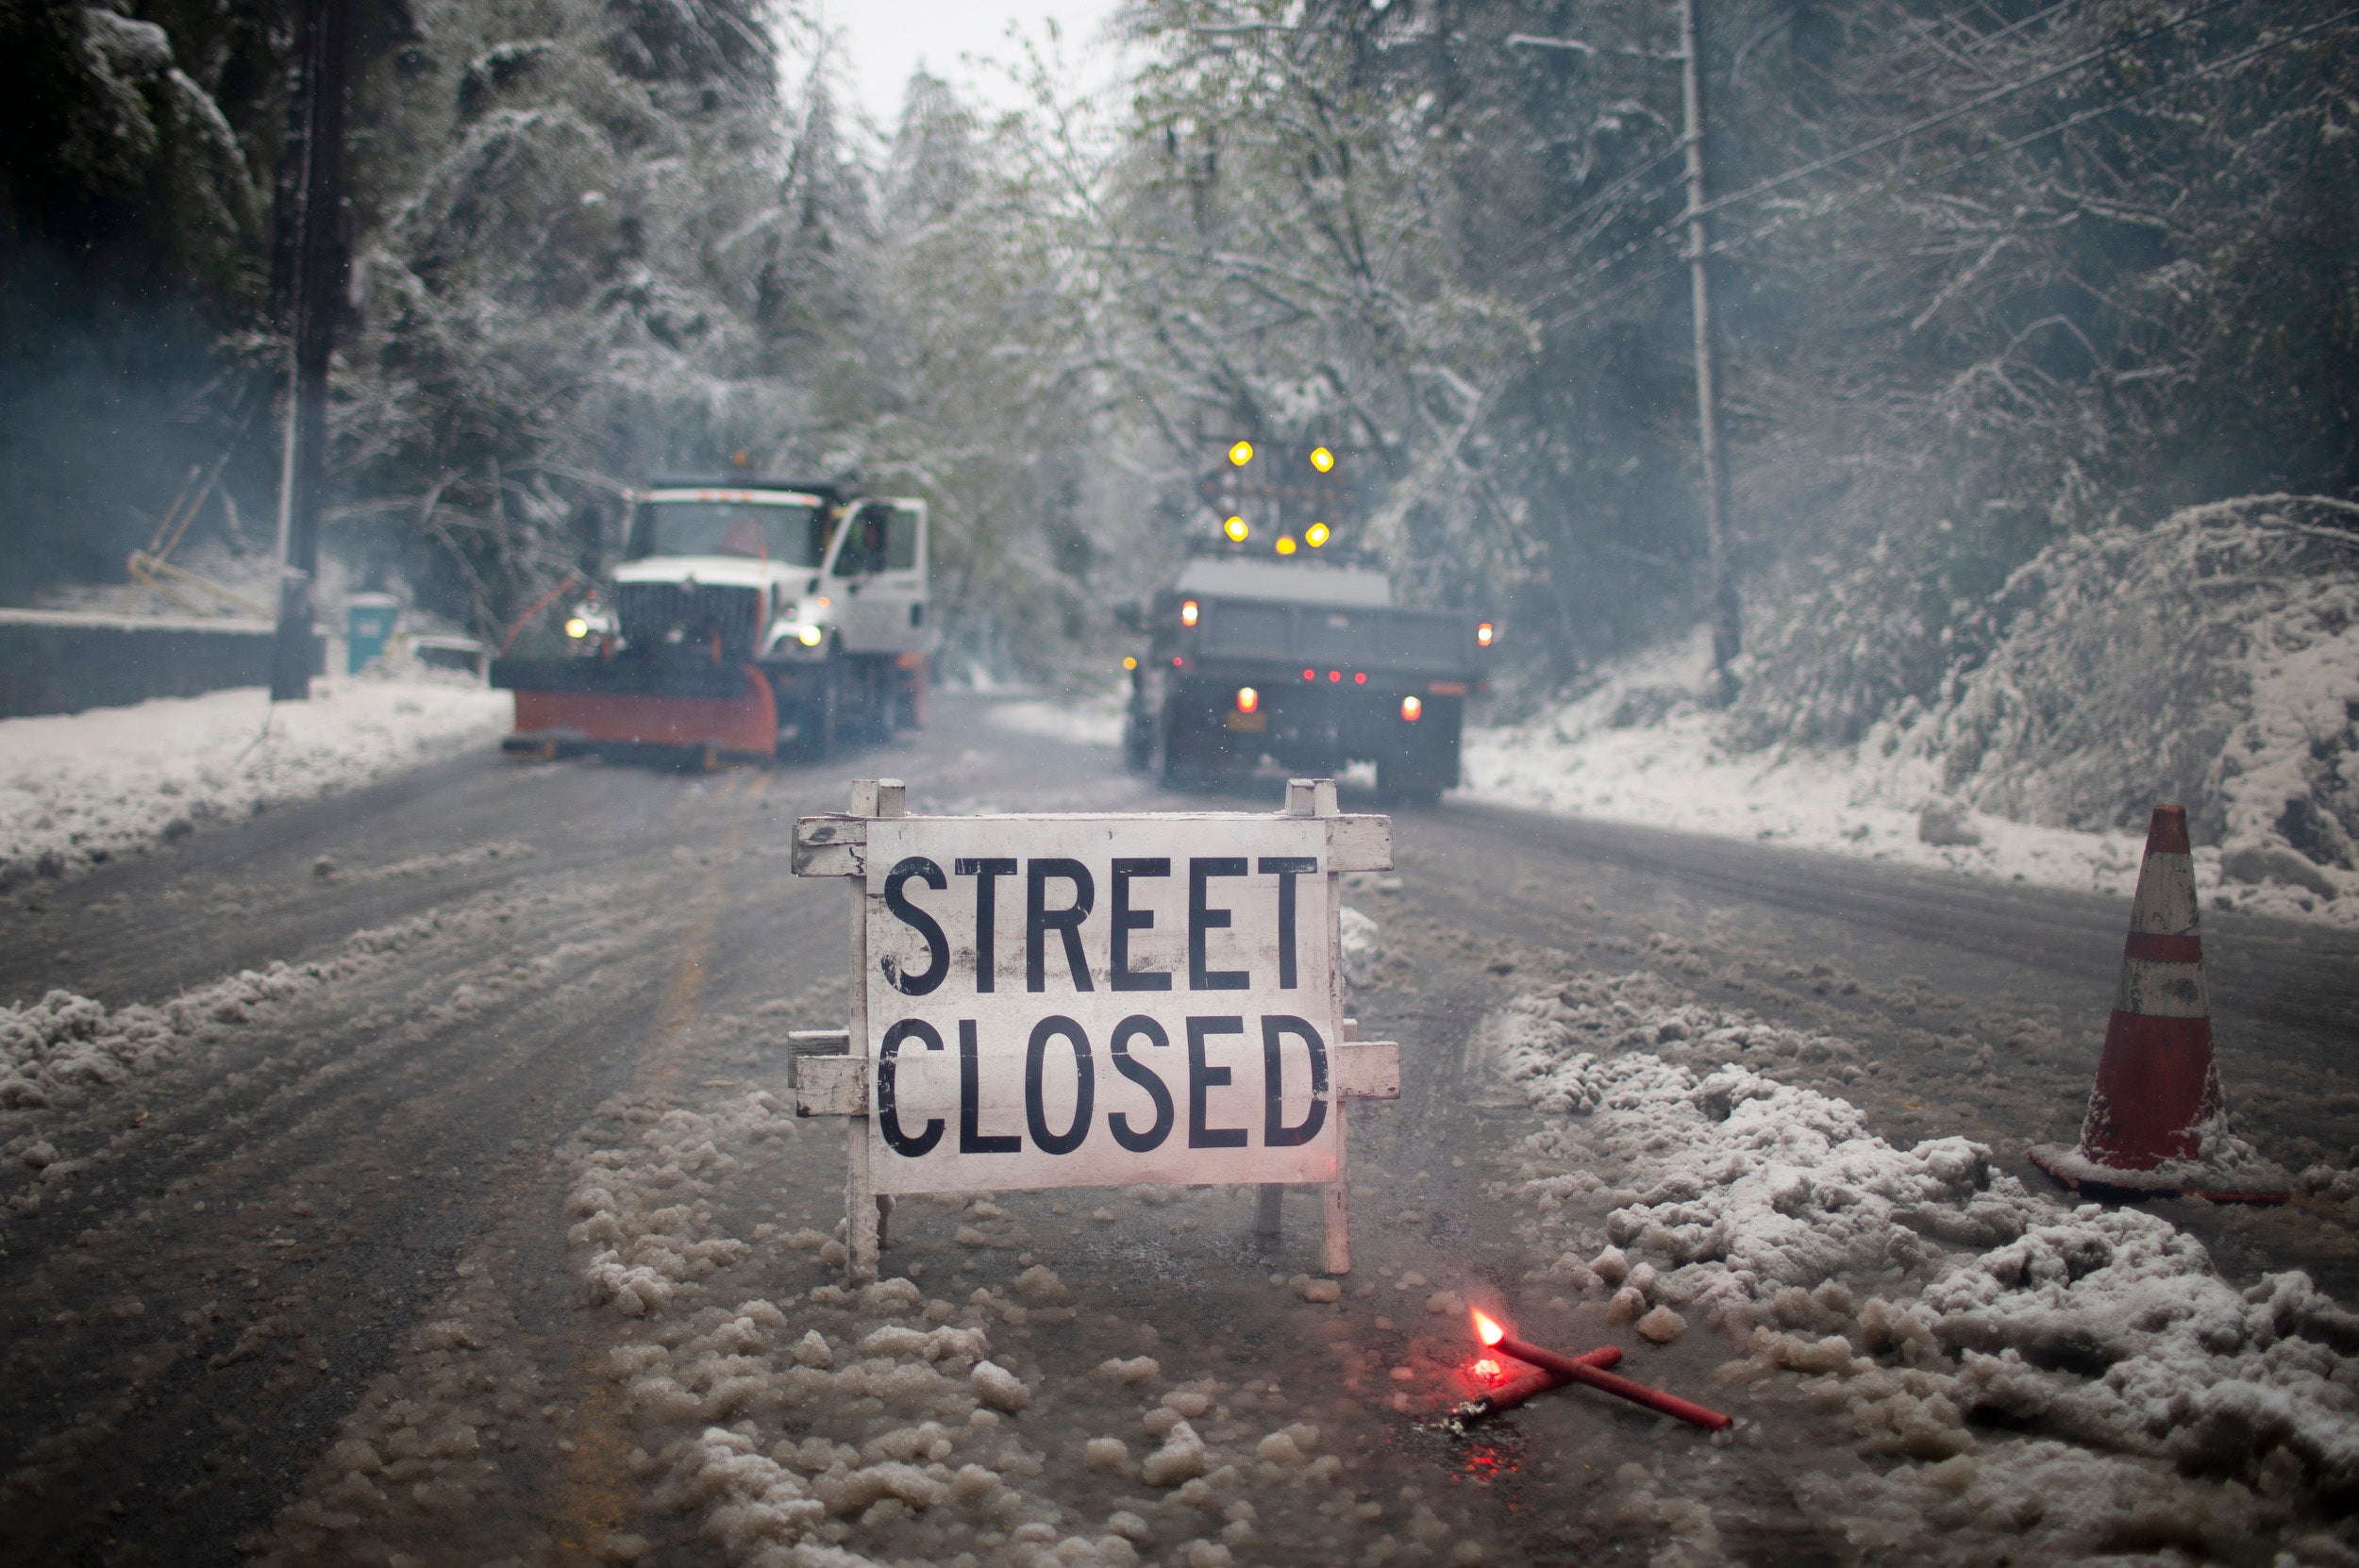 Crews closed W Burnside Rd. at SW Tichner Dr. as several inches of snow fell in the Portland area on, Monday, April 11, 2022. Portland received the first measurable snowfall in April in recorded history on Monday. (Dave Killen/The Oregonian via AP)